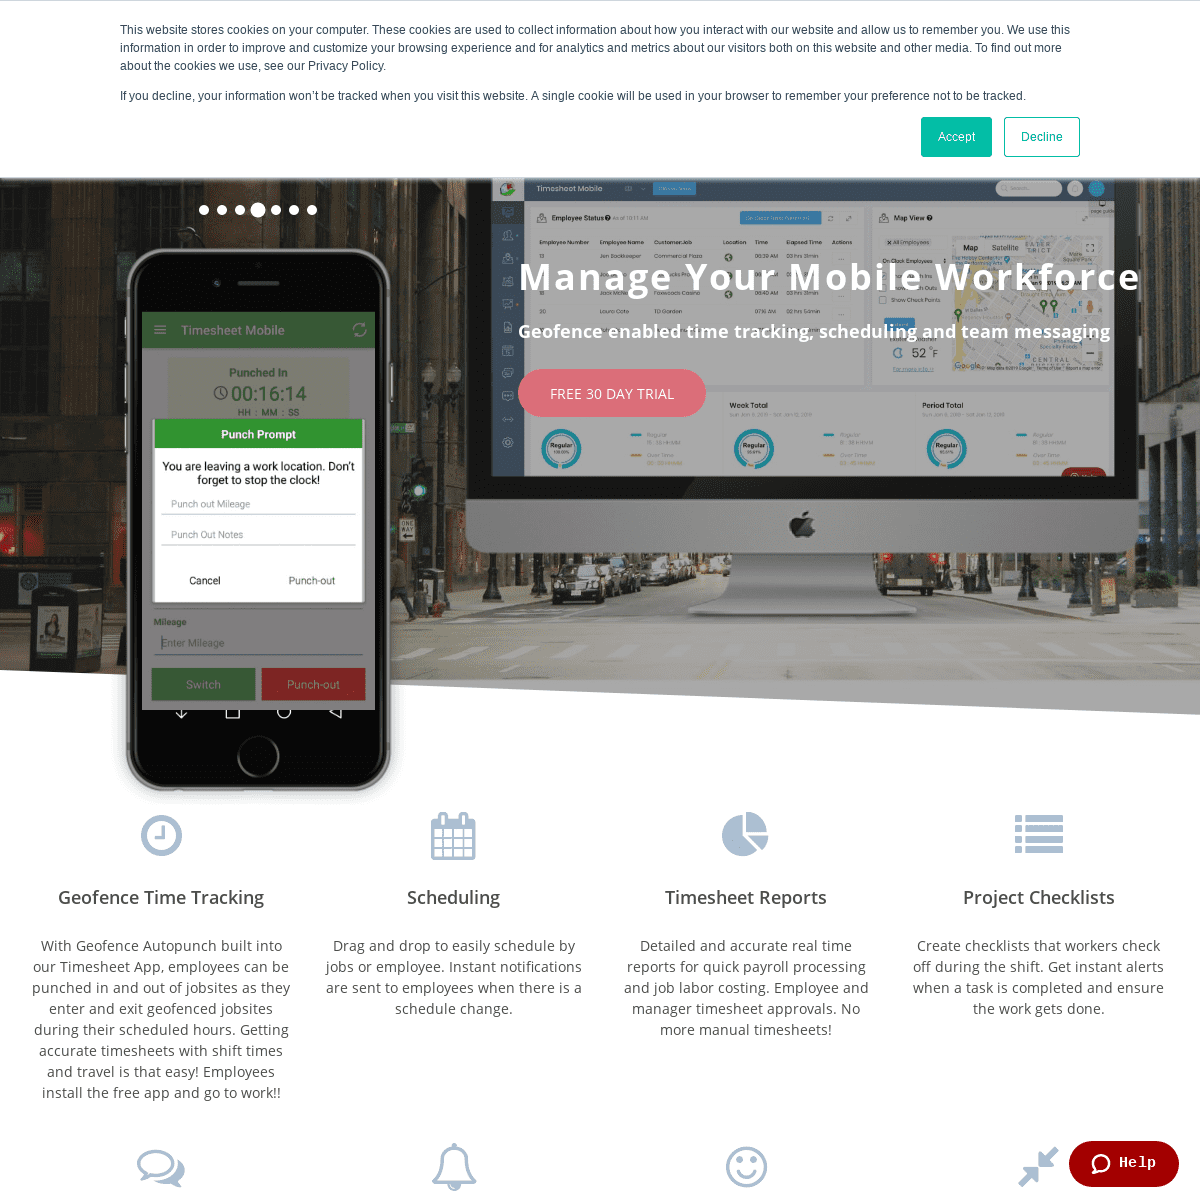 Employee Timesheet APP with GPS Geofencing Technology